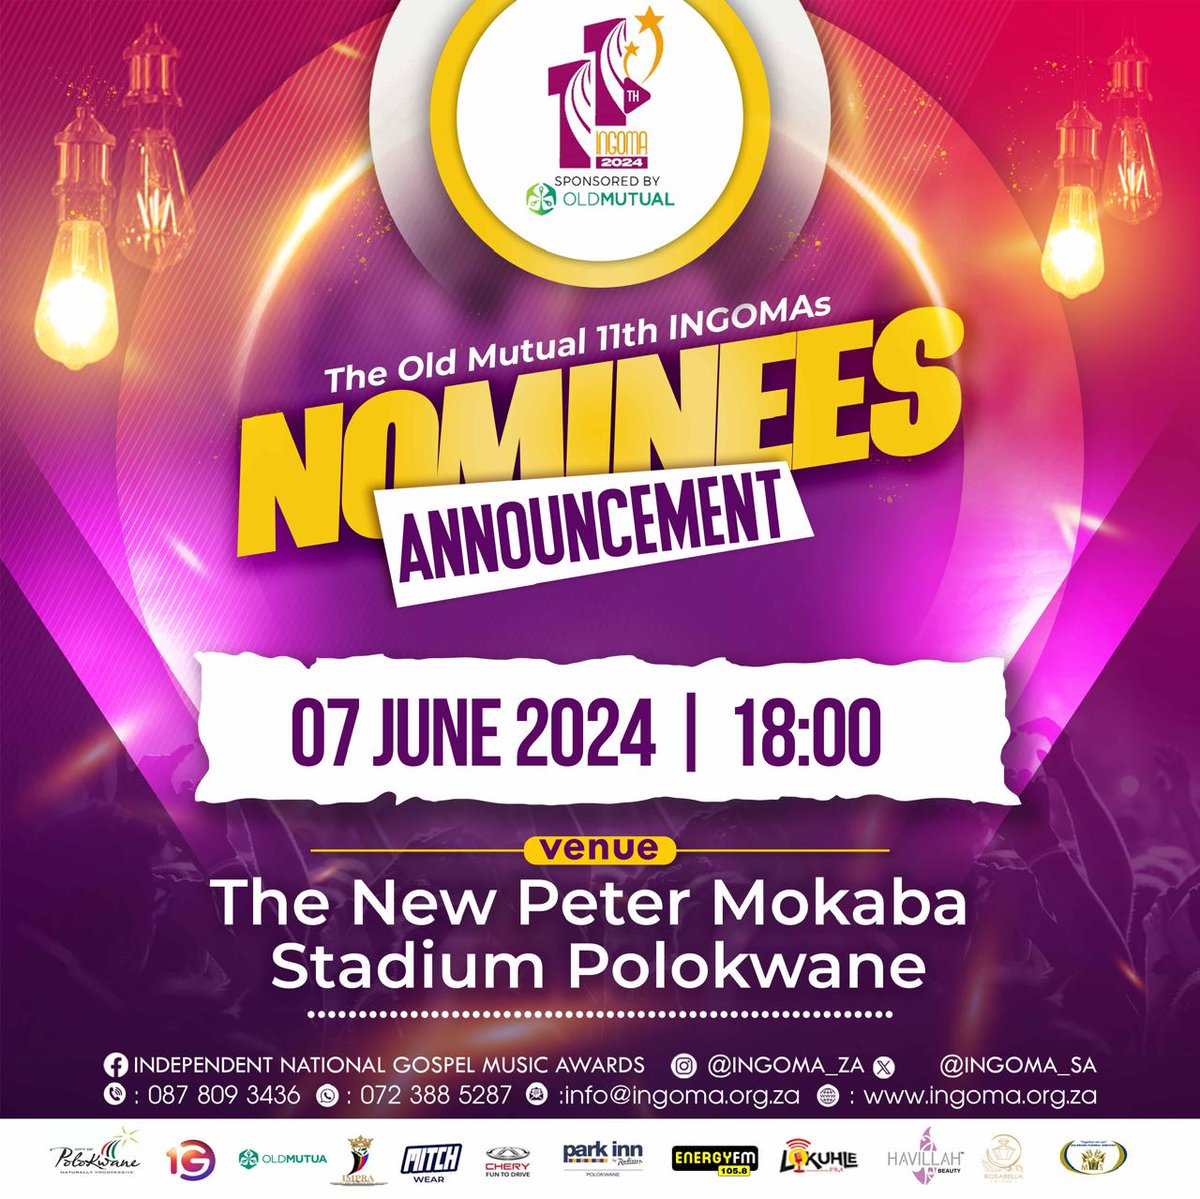 Stay tuned for the announcement of nominees of the Old Mutual 11th INGOMAs on 7 June 2024 at the new Peter Mokaba Stadium. #LokuhleFM